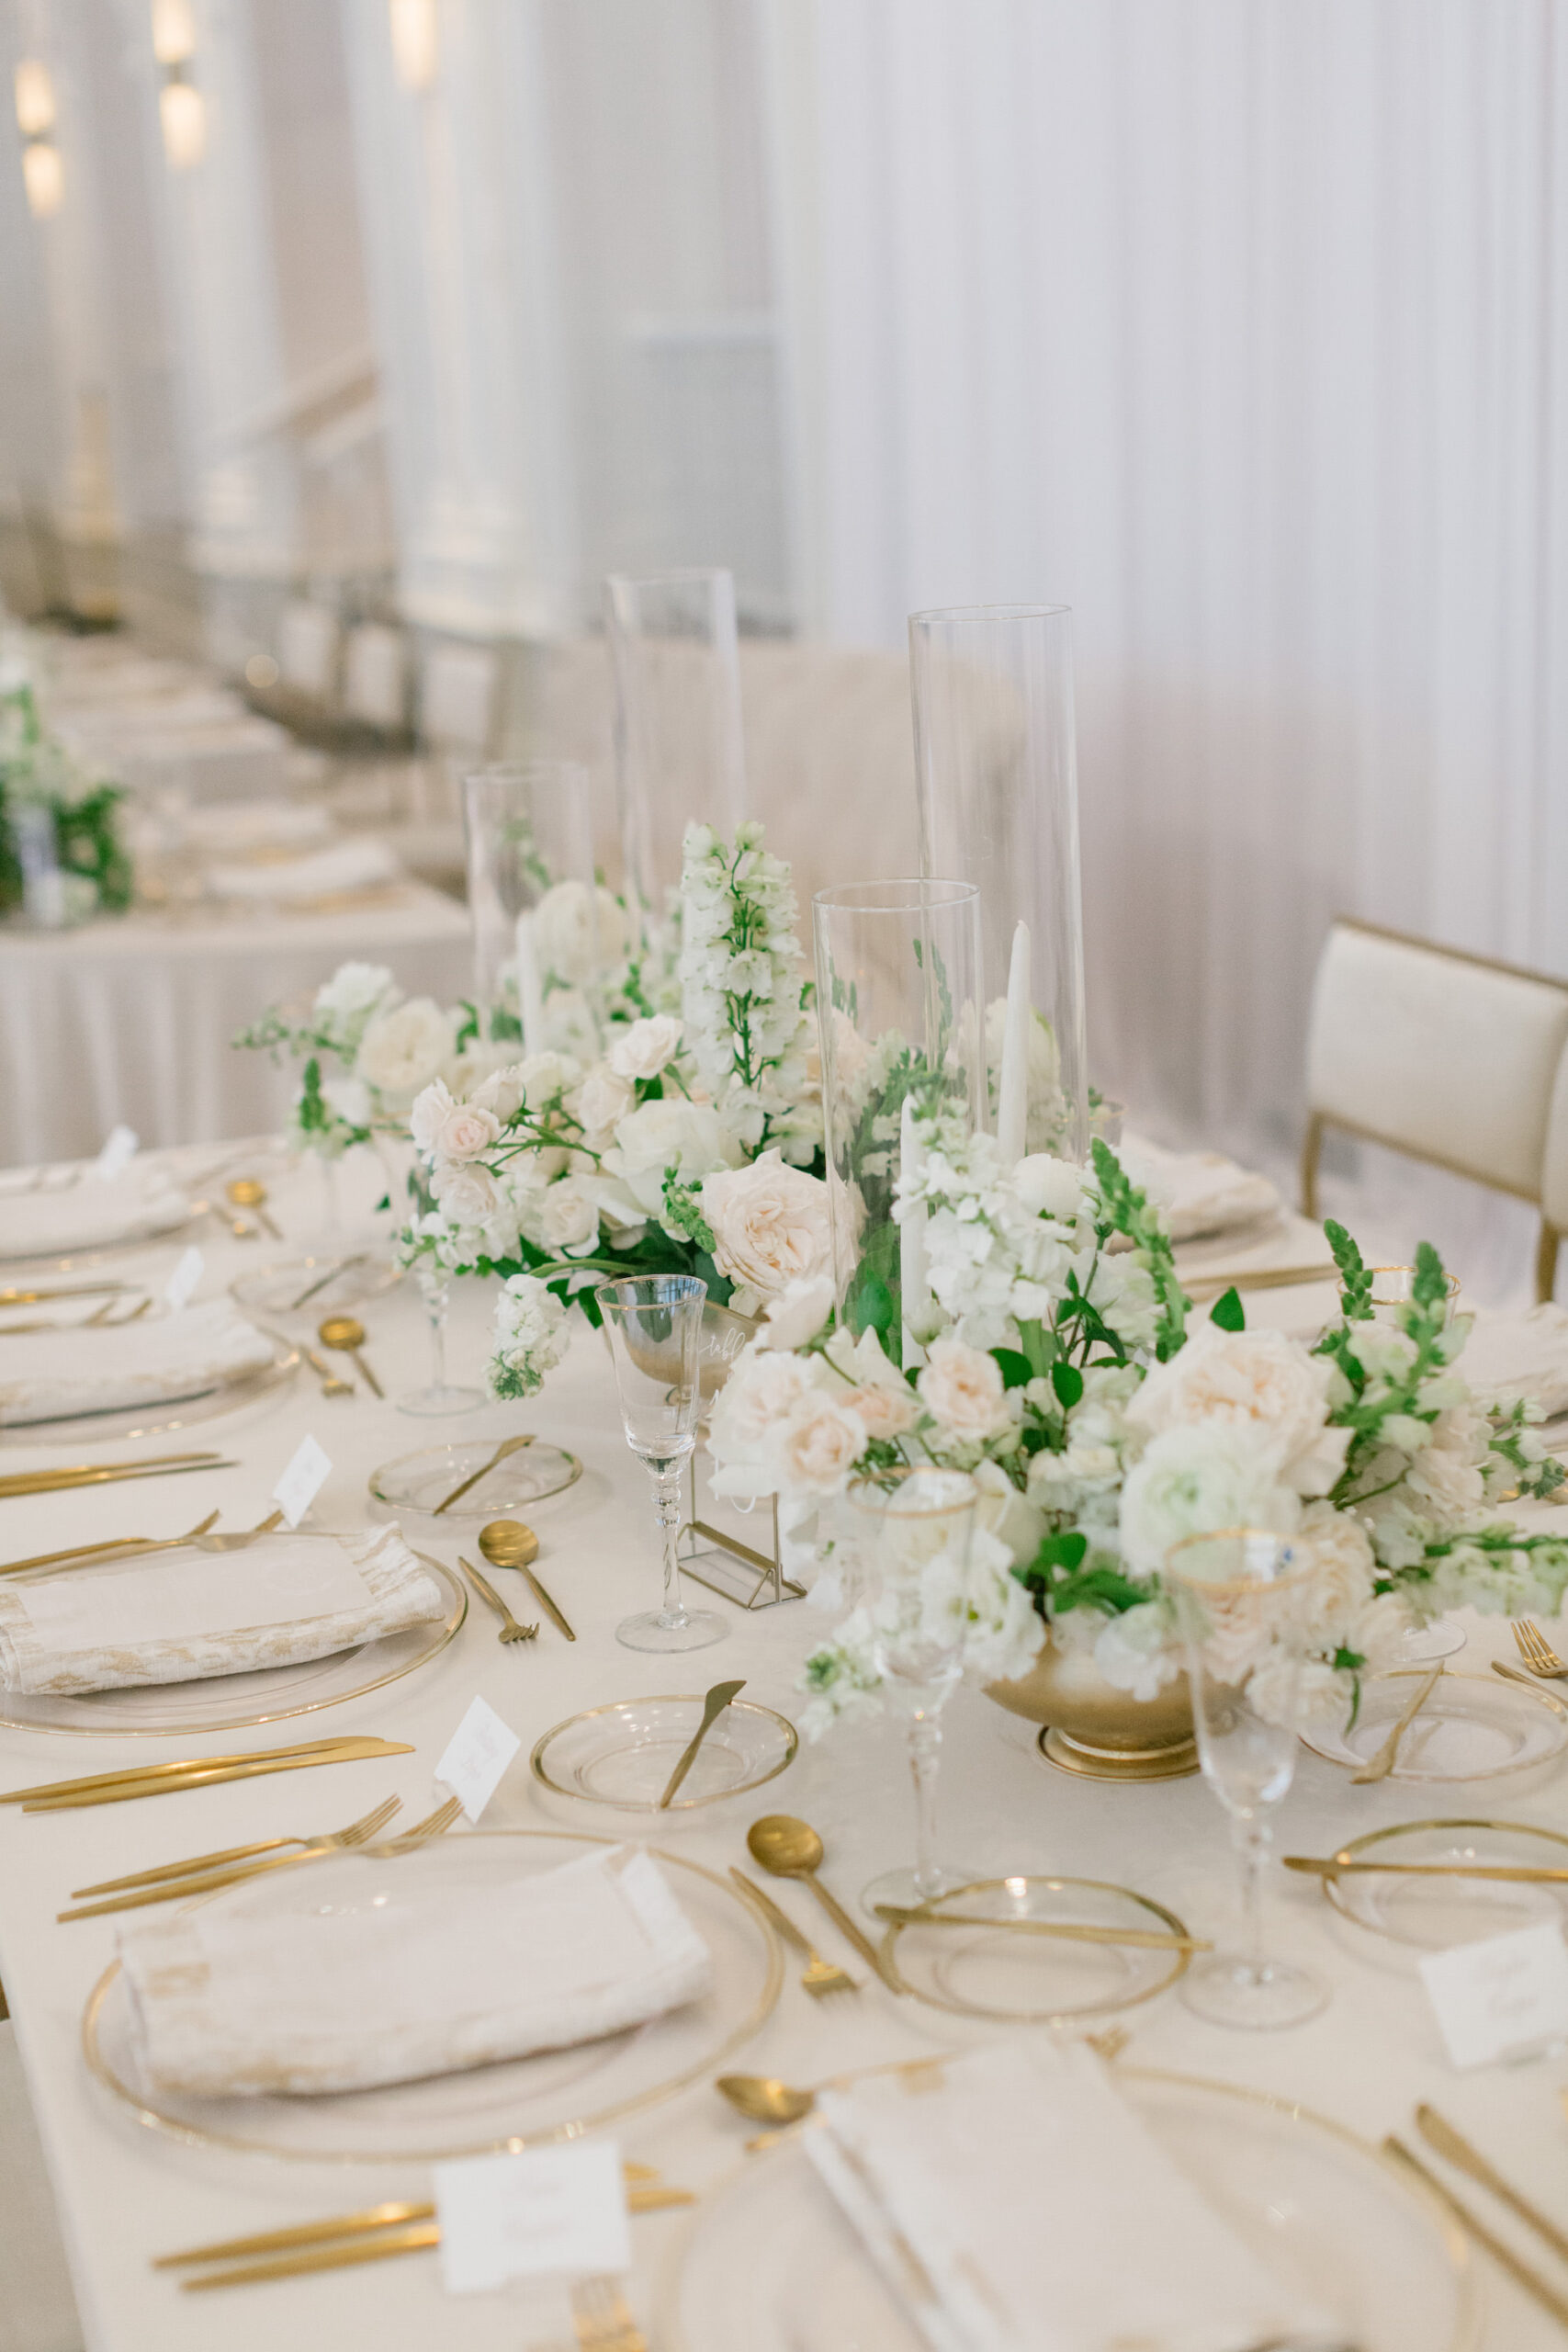 Elegant Gold Rimmed Charger with Gold Flatware | White Snapdragon and Garden Rose Wedding Centerpiece Inspiration